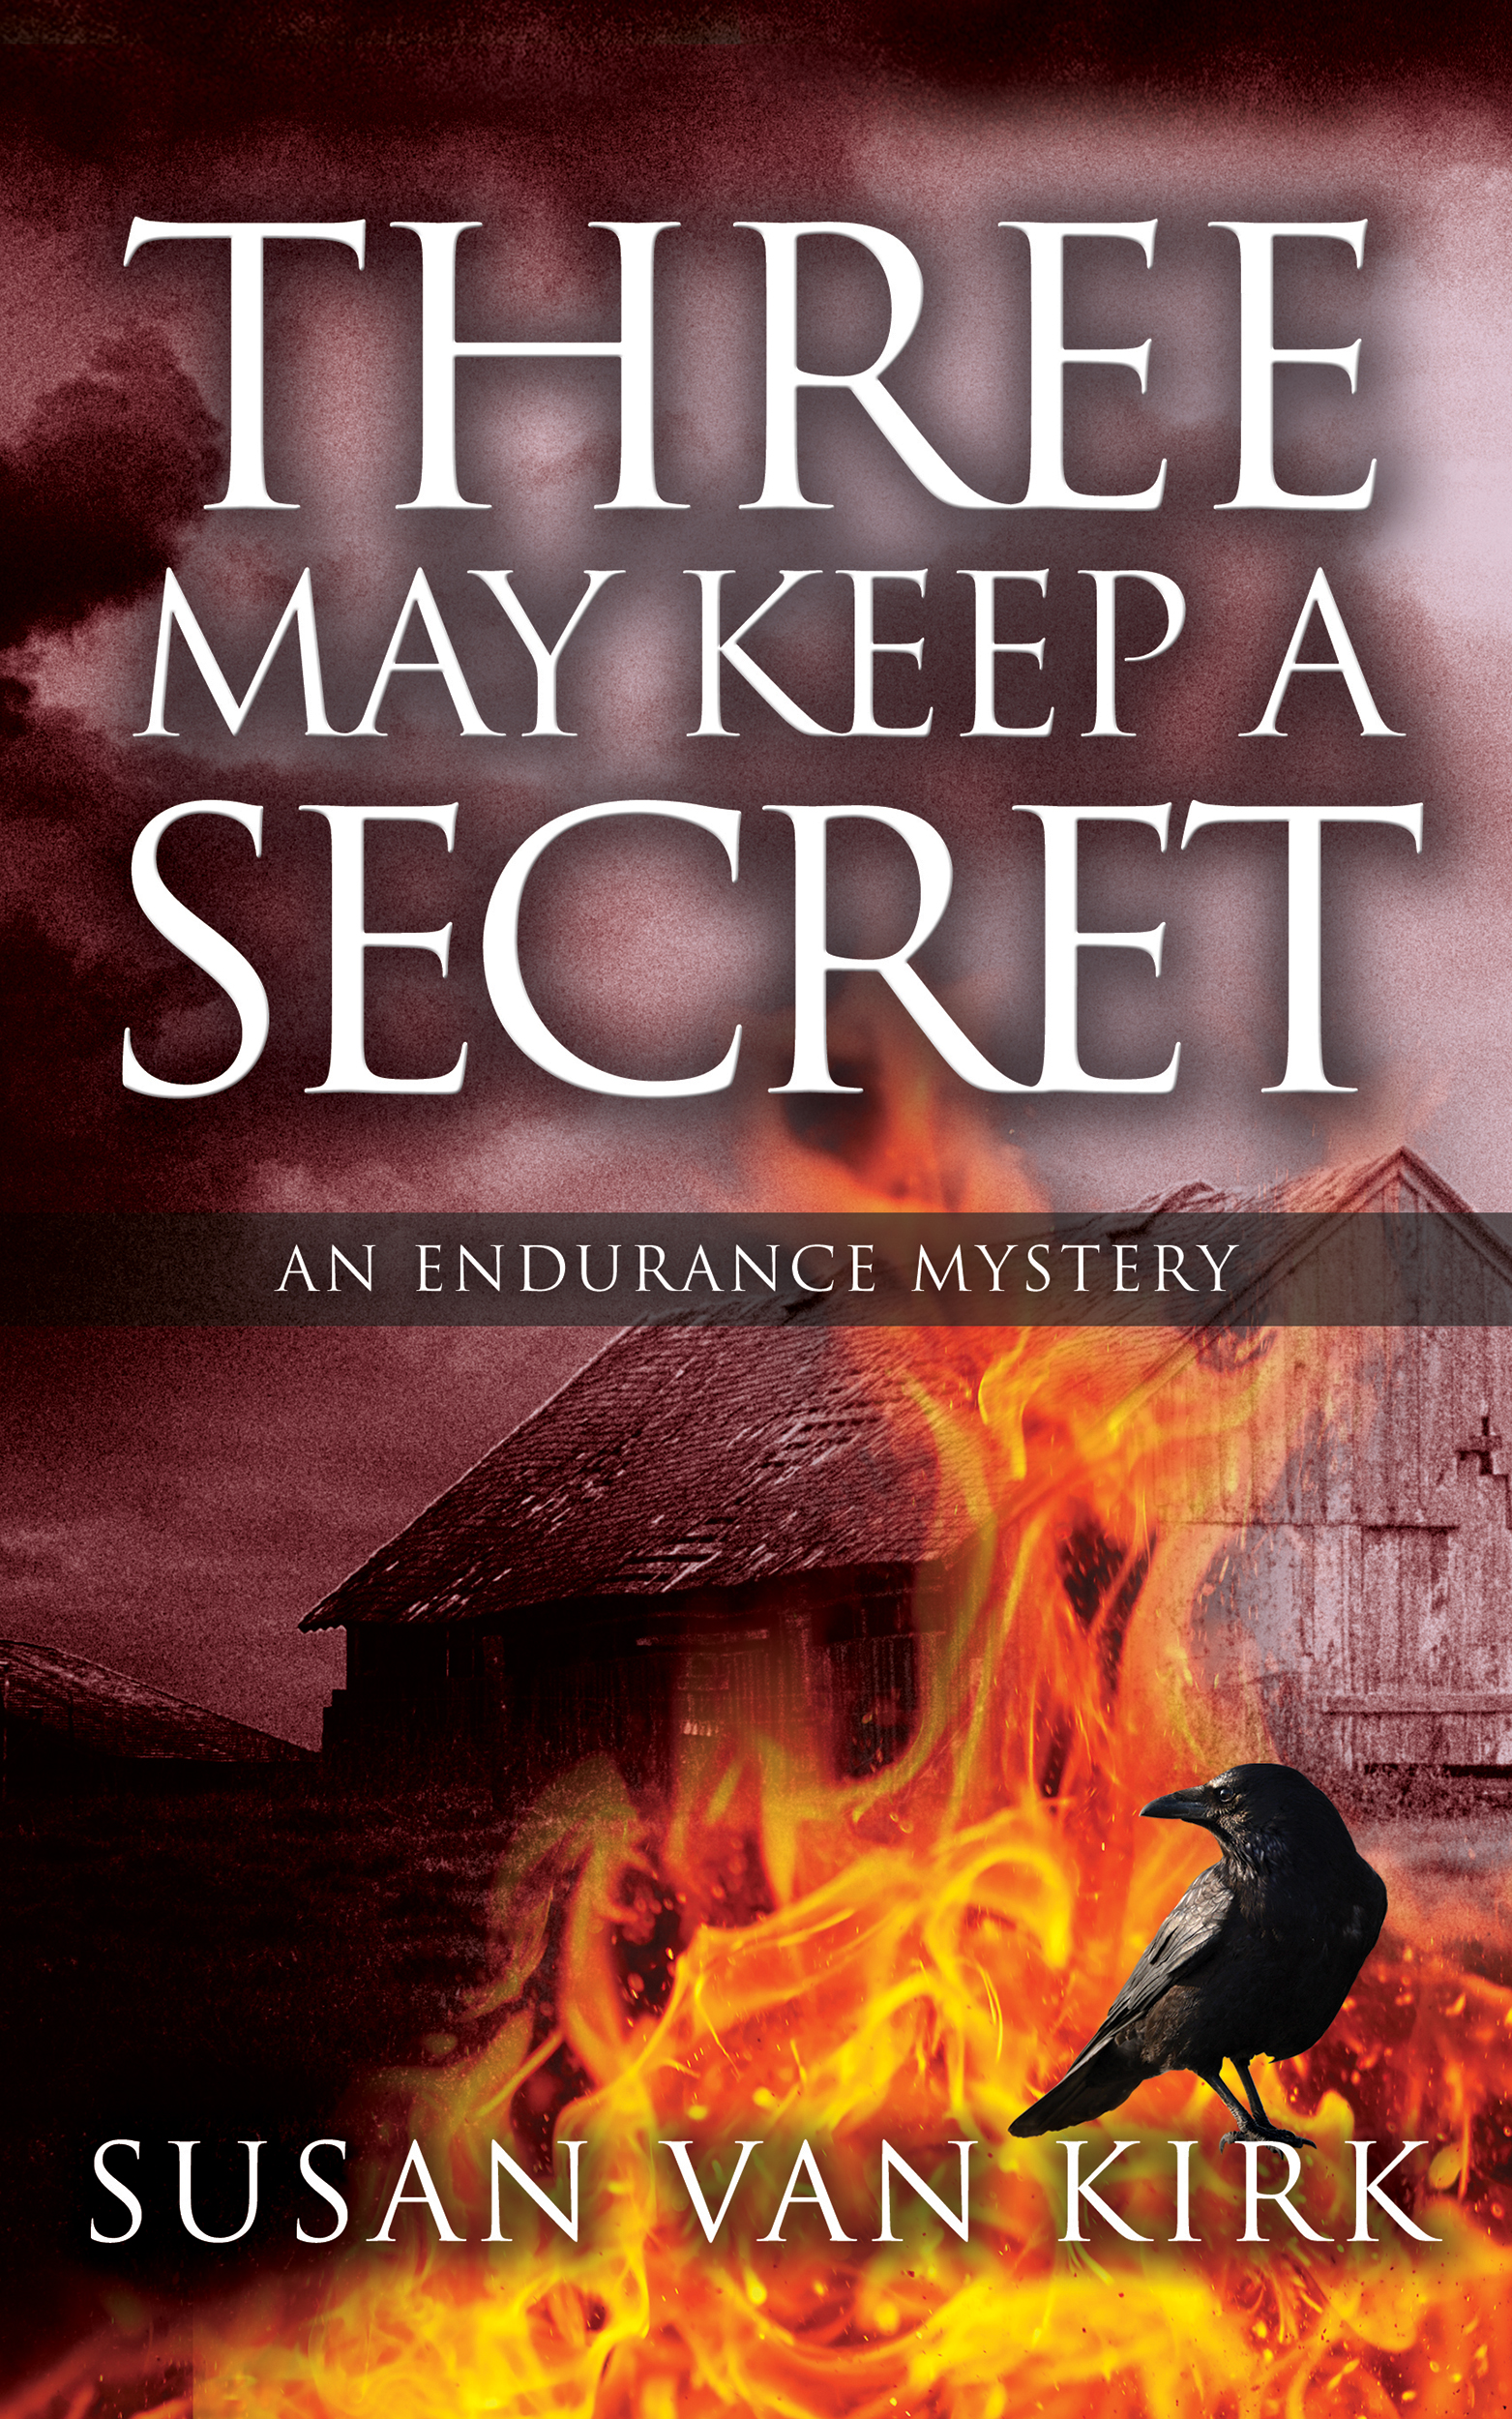 book cover image with title and author with an image of a bird, and a fire burning an old barn. 